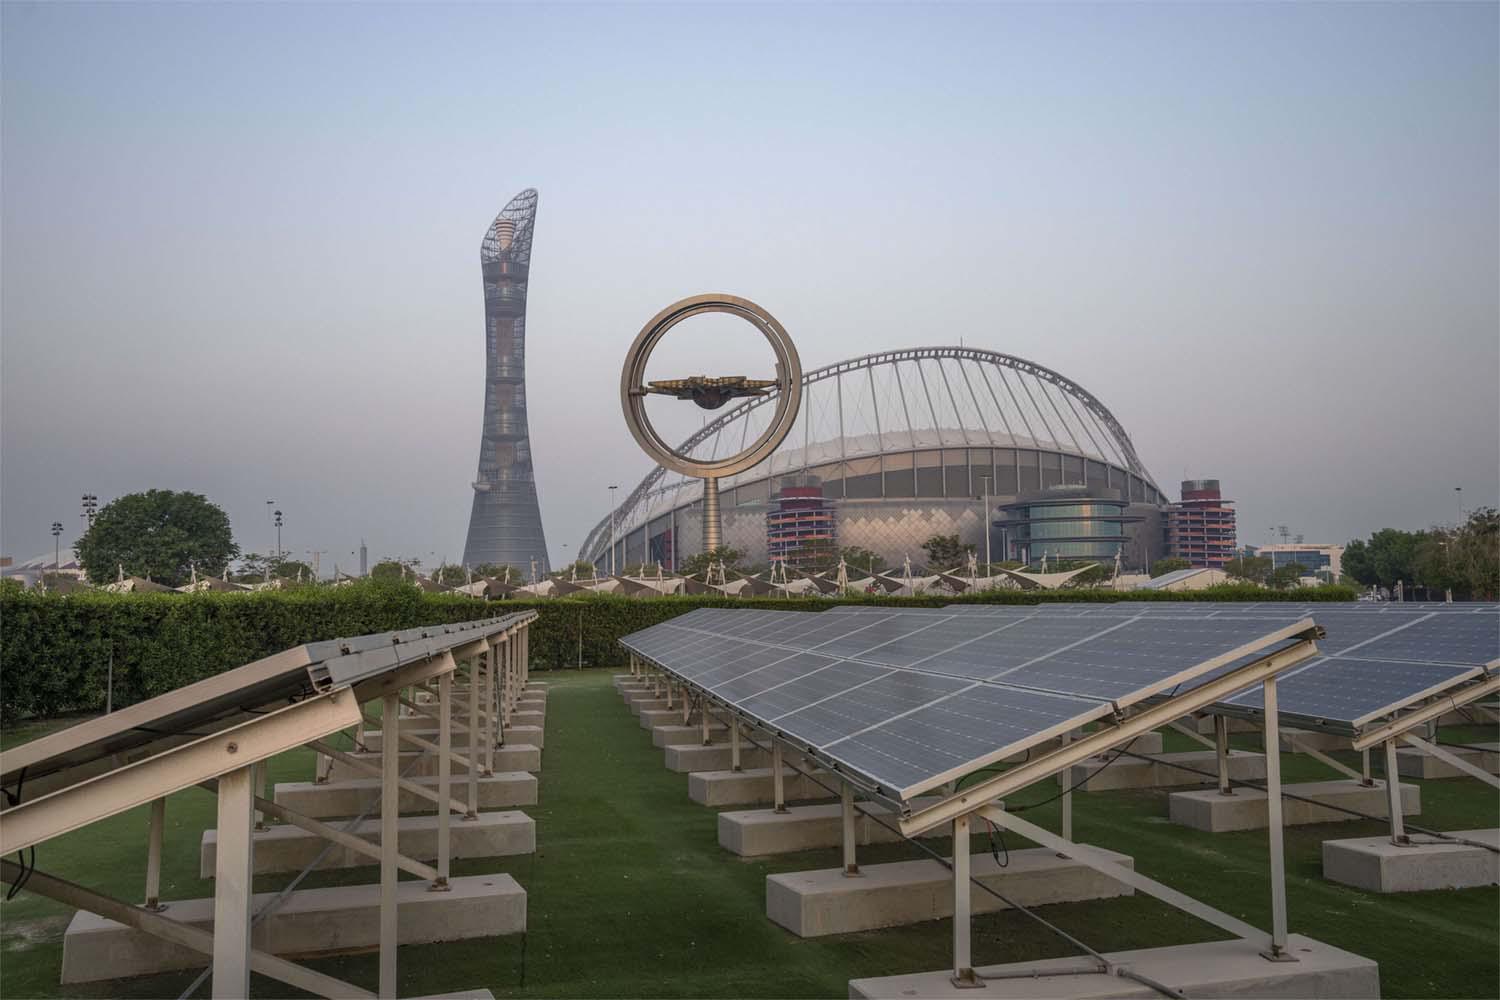 Qatari organizers insist the country is on track to host the first carbon-neutral World Cup